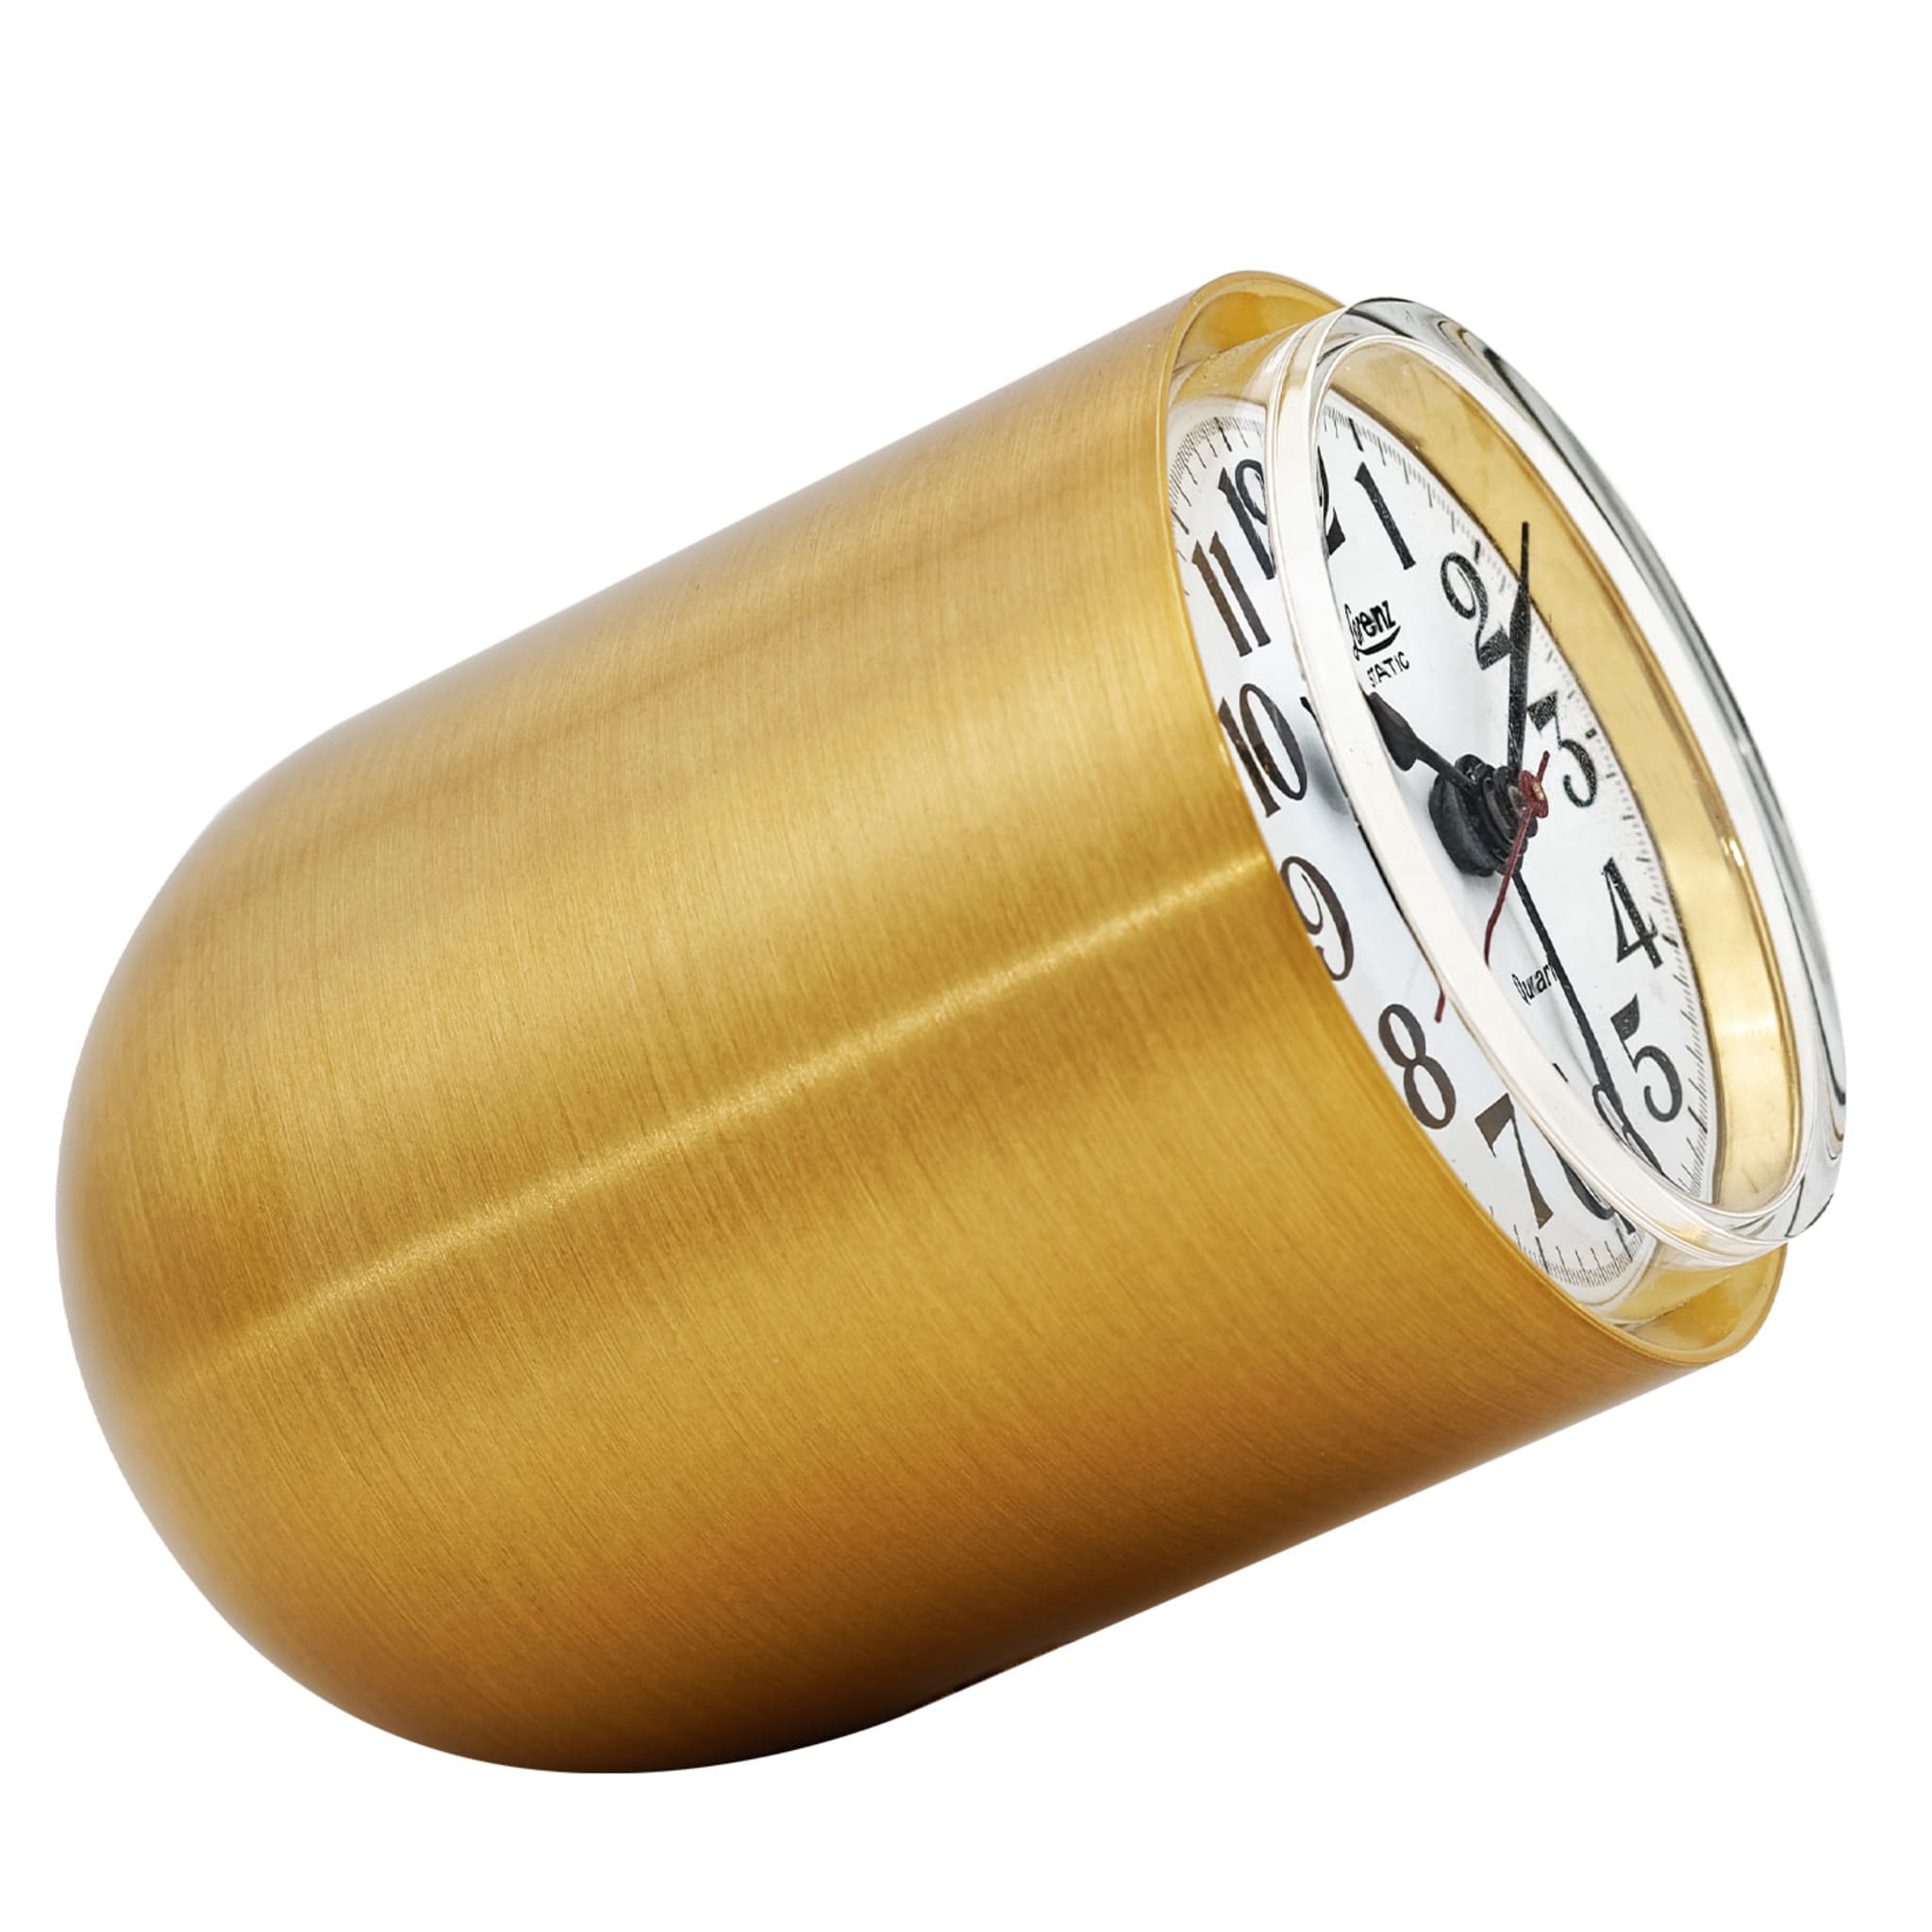 Static Gold Table Clock by Richard Sapper - Alternative view 1